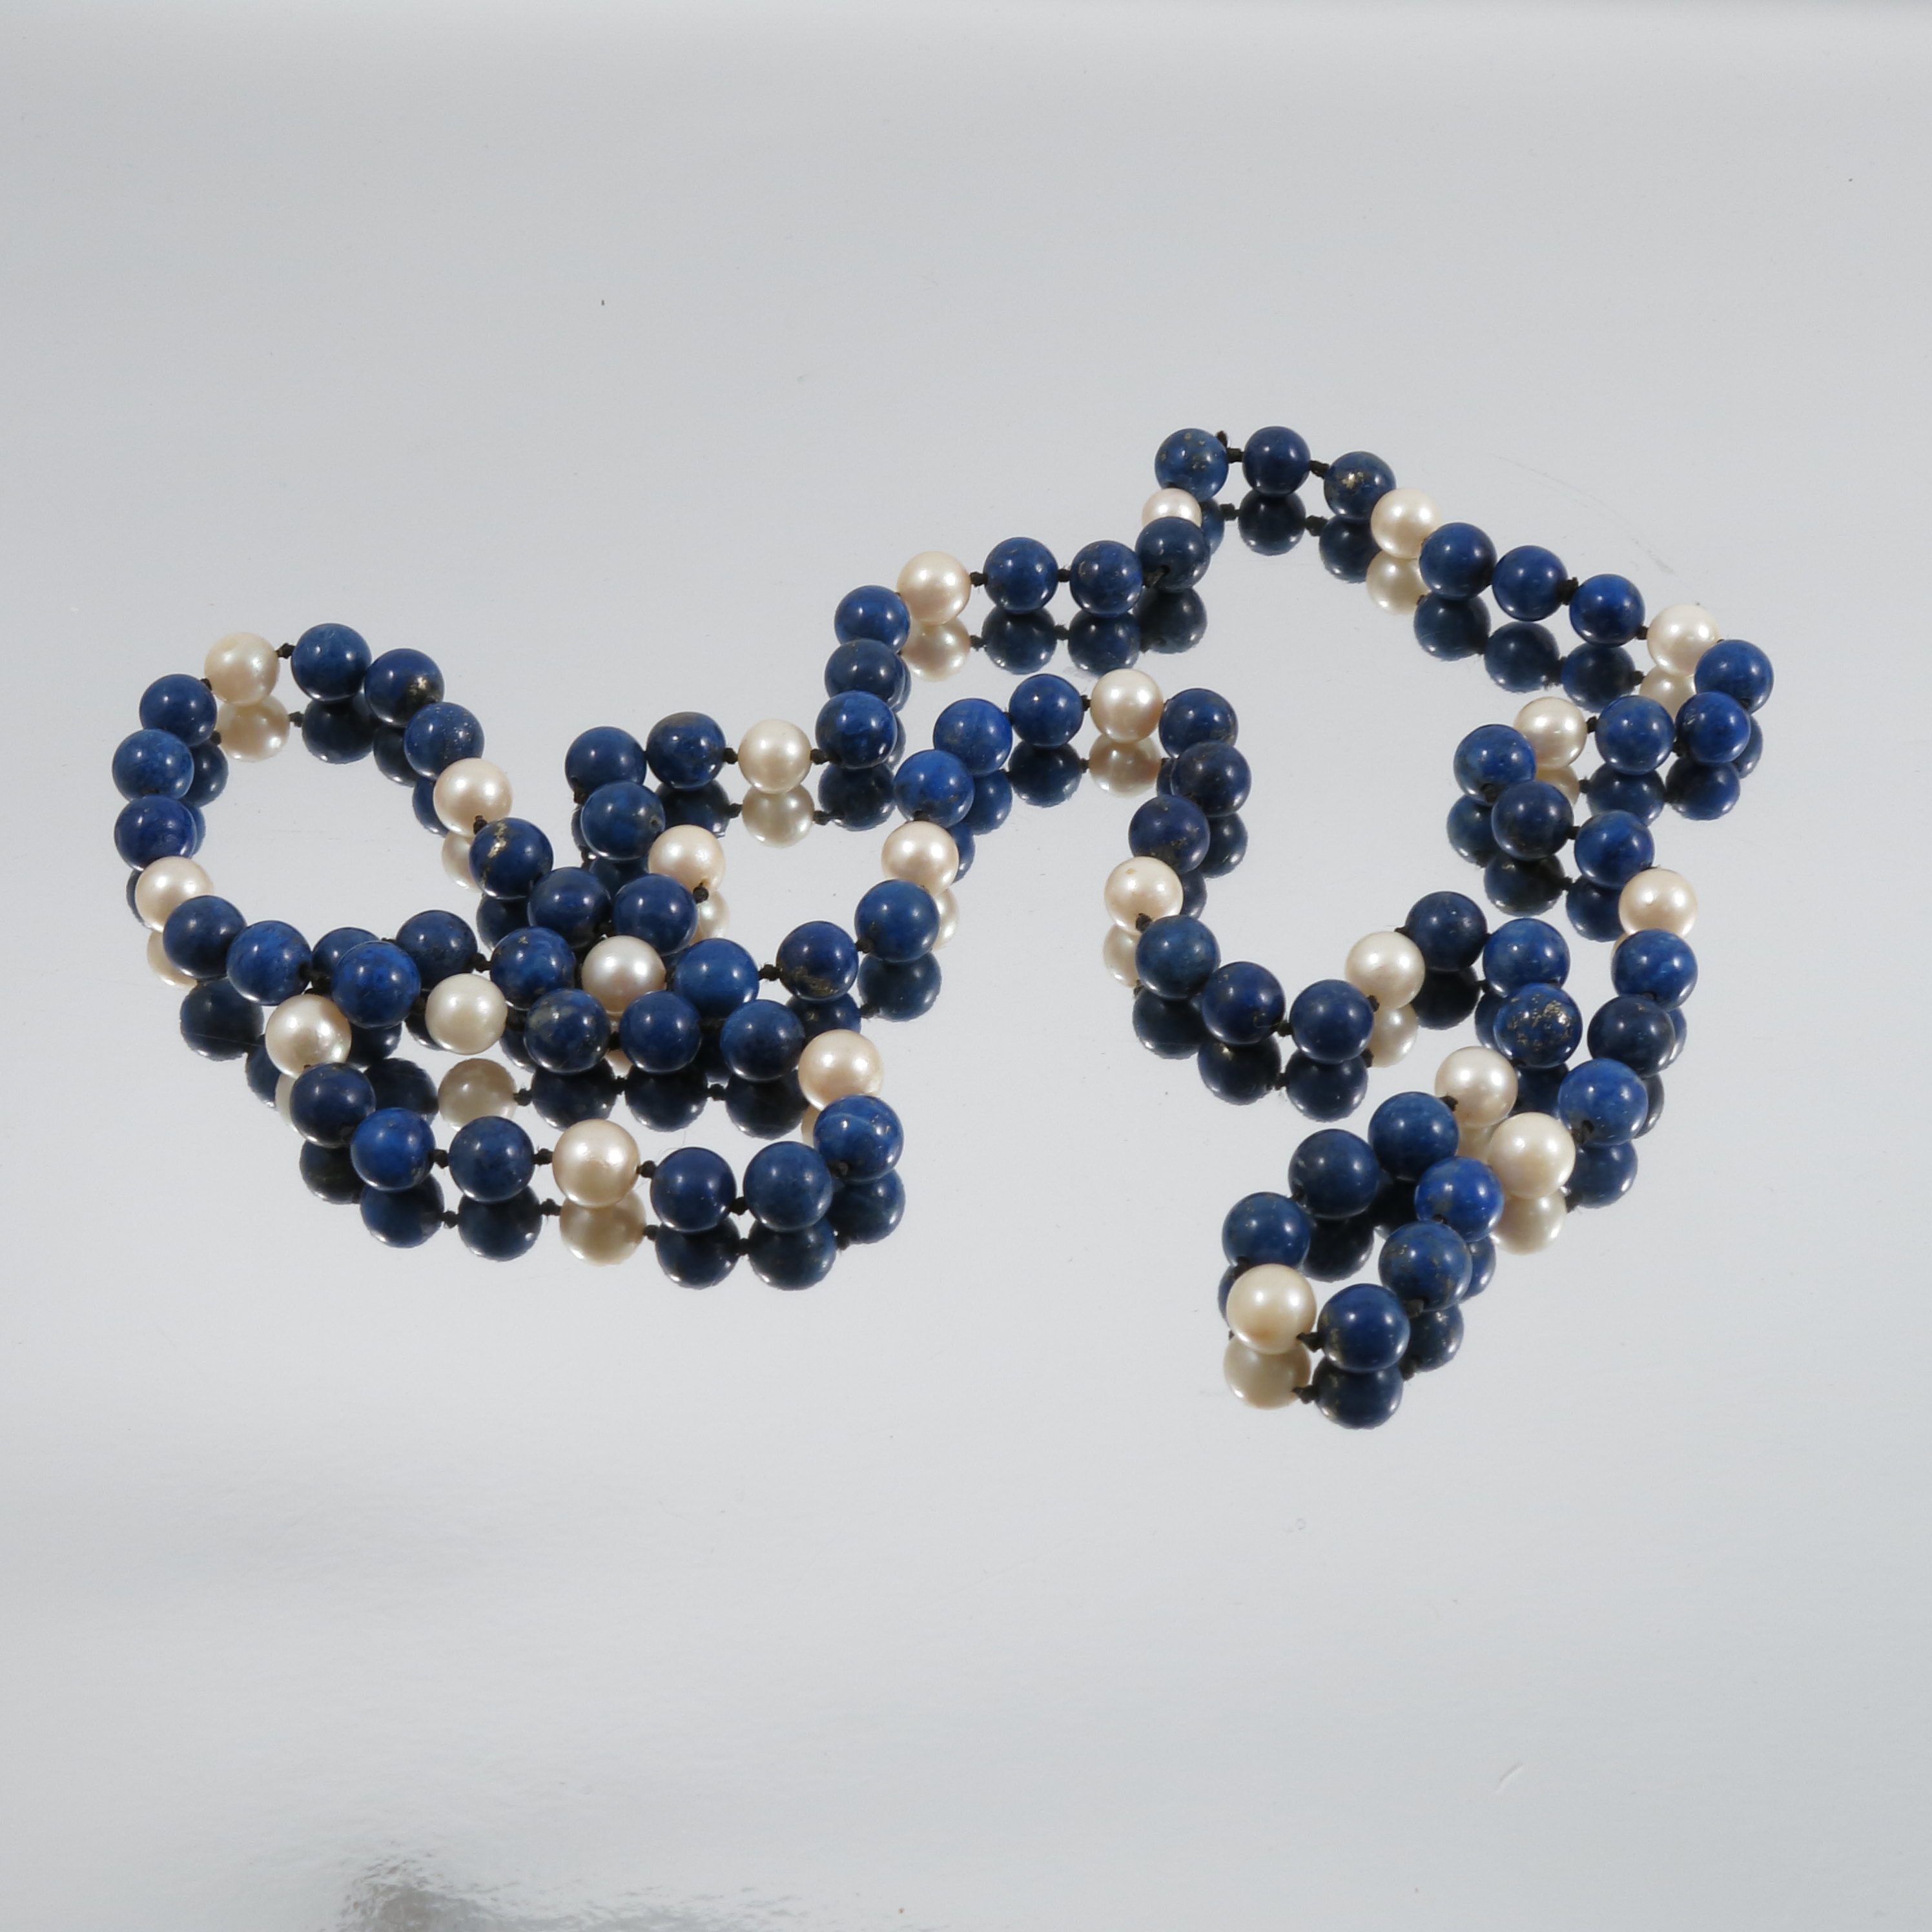 A lapis lazuli and cultured pearl necklace, 84cm long - Image 2 of 2